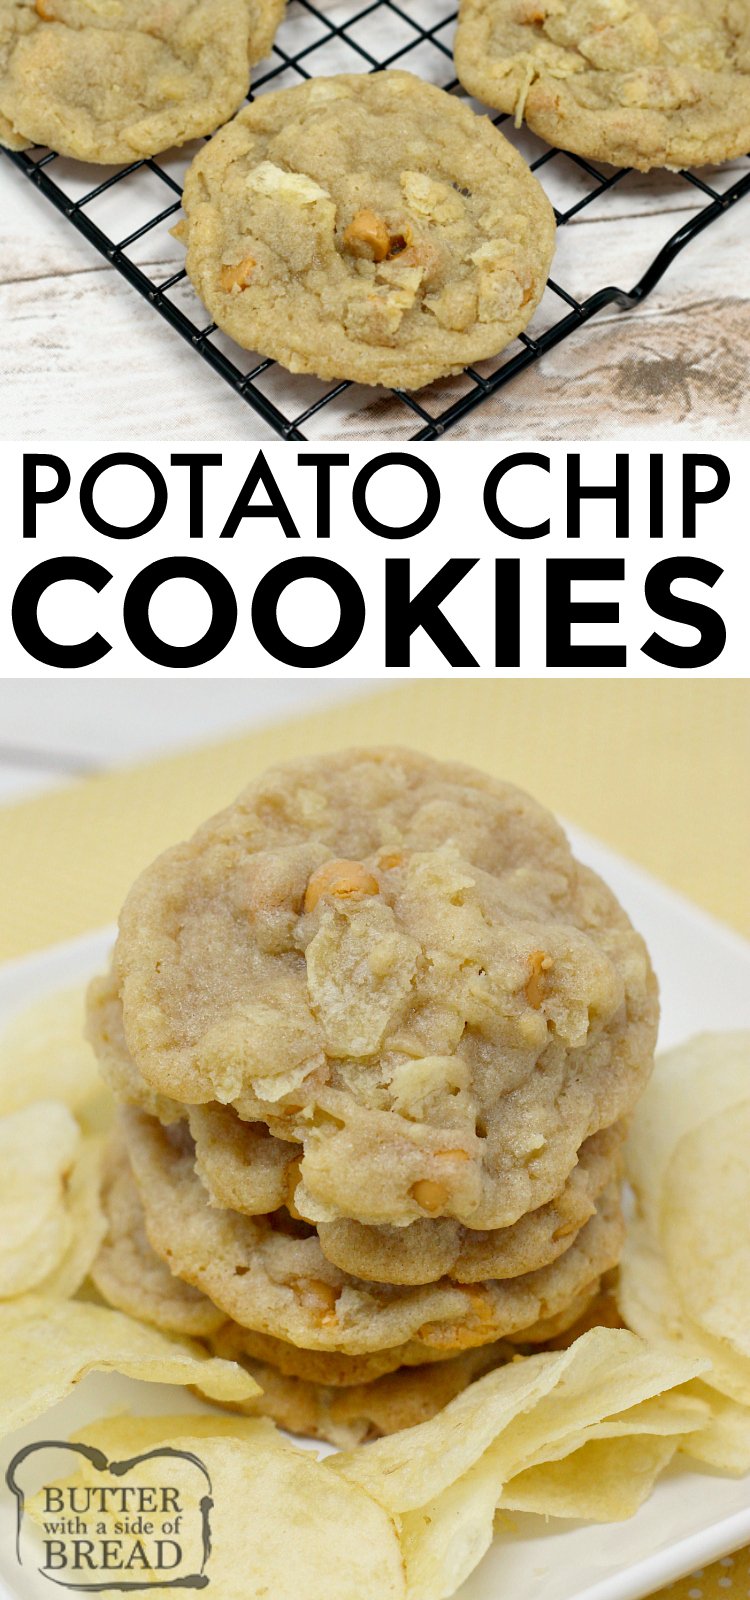 Potato Chip Cookies are the perfect combination of salty and sweet! Butterscotch chips and potato chips pair together so well in this potato chip cookie recipe!